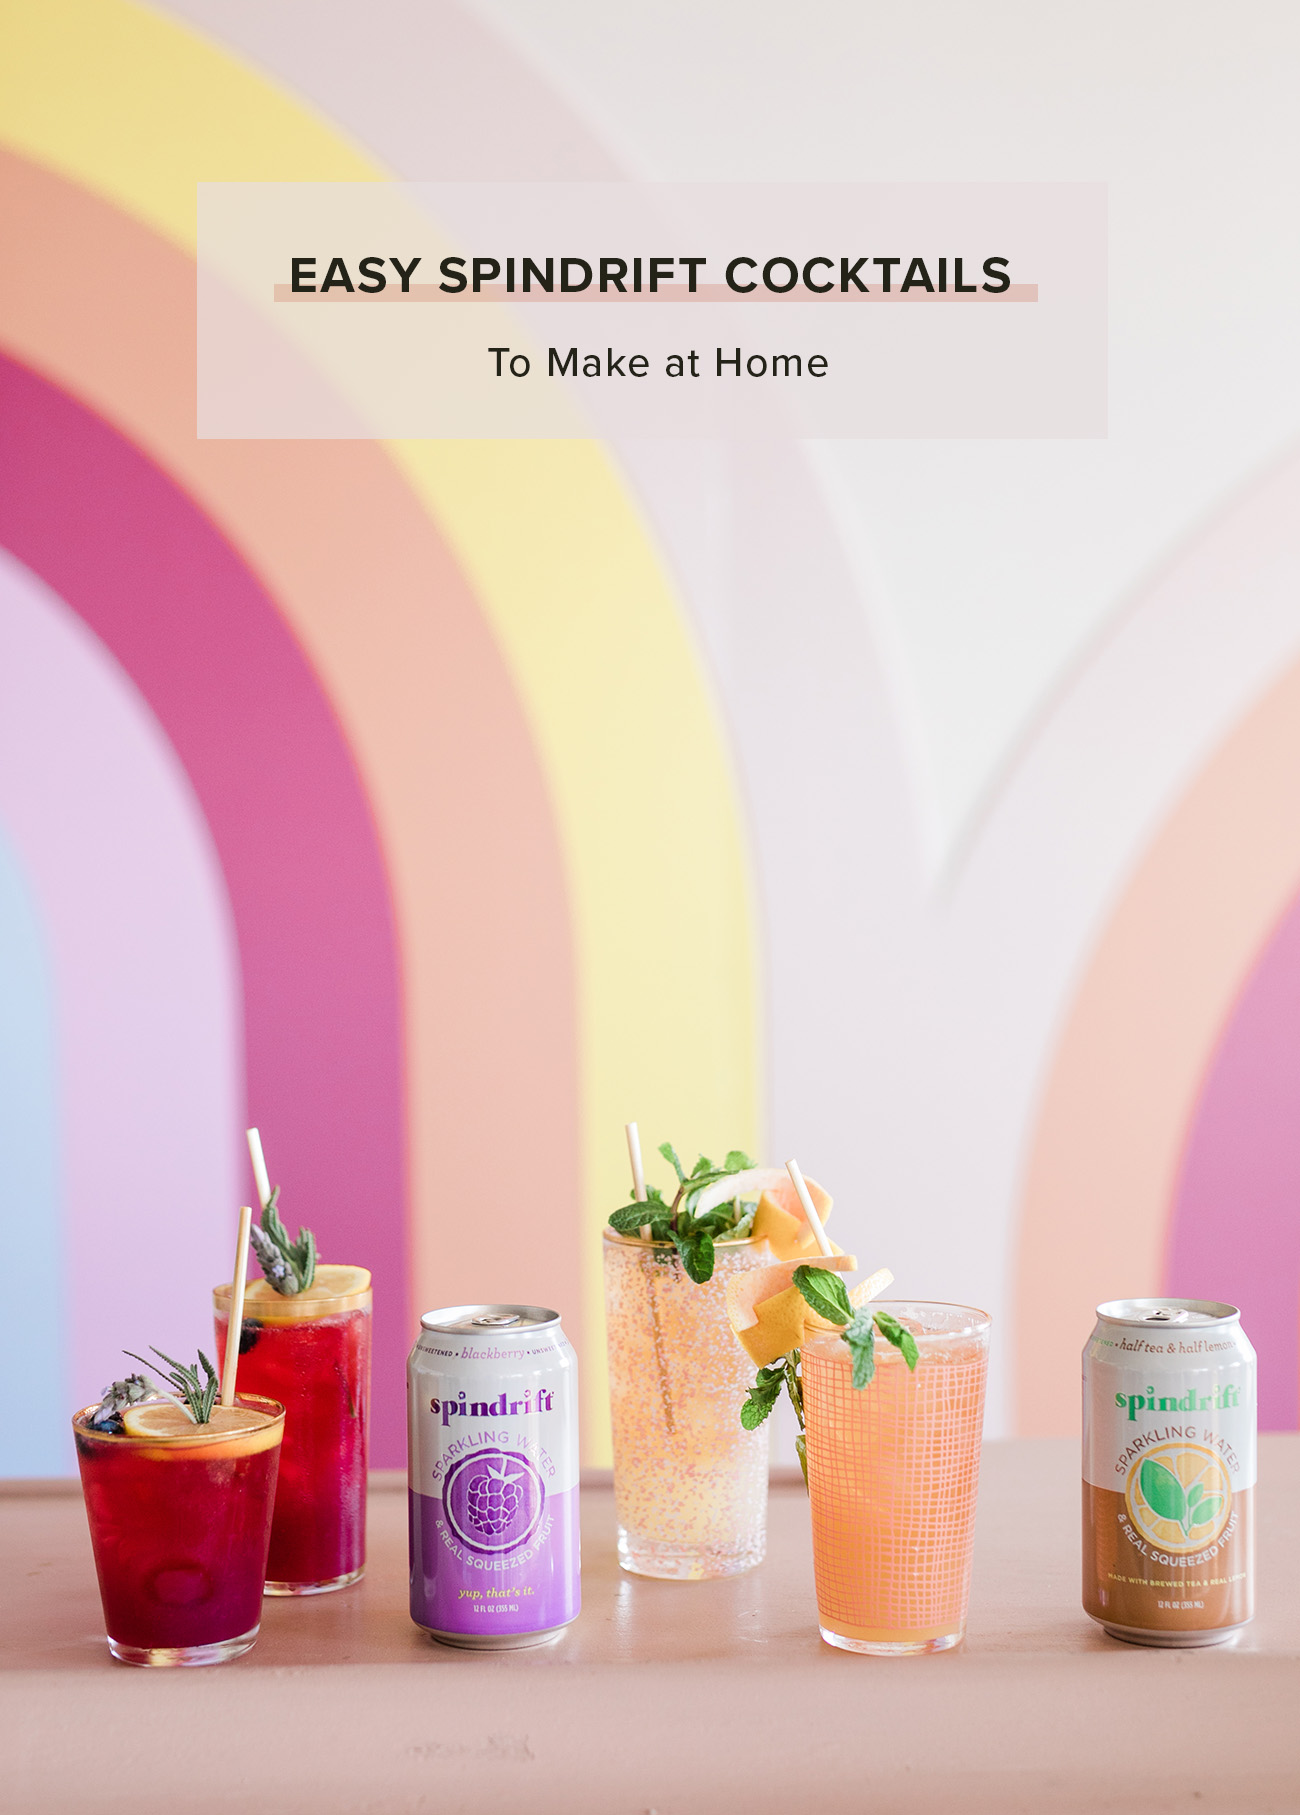 Spindrift cocktails to make at home